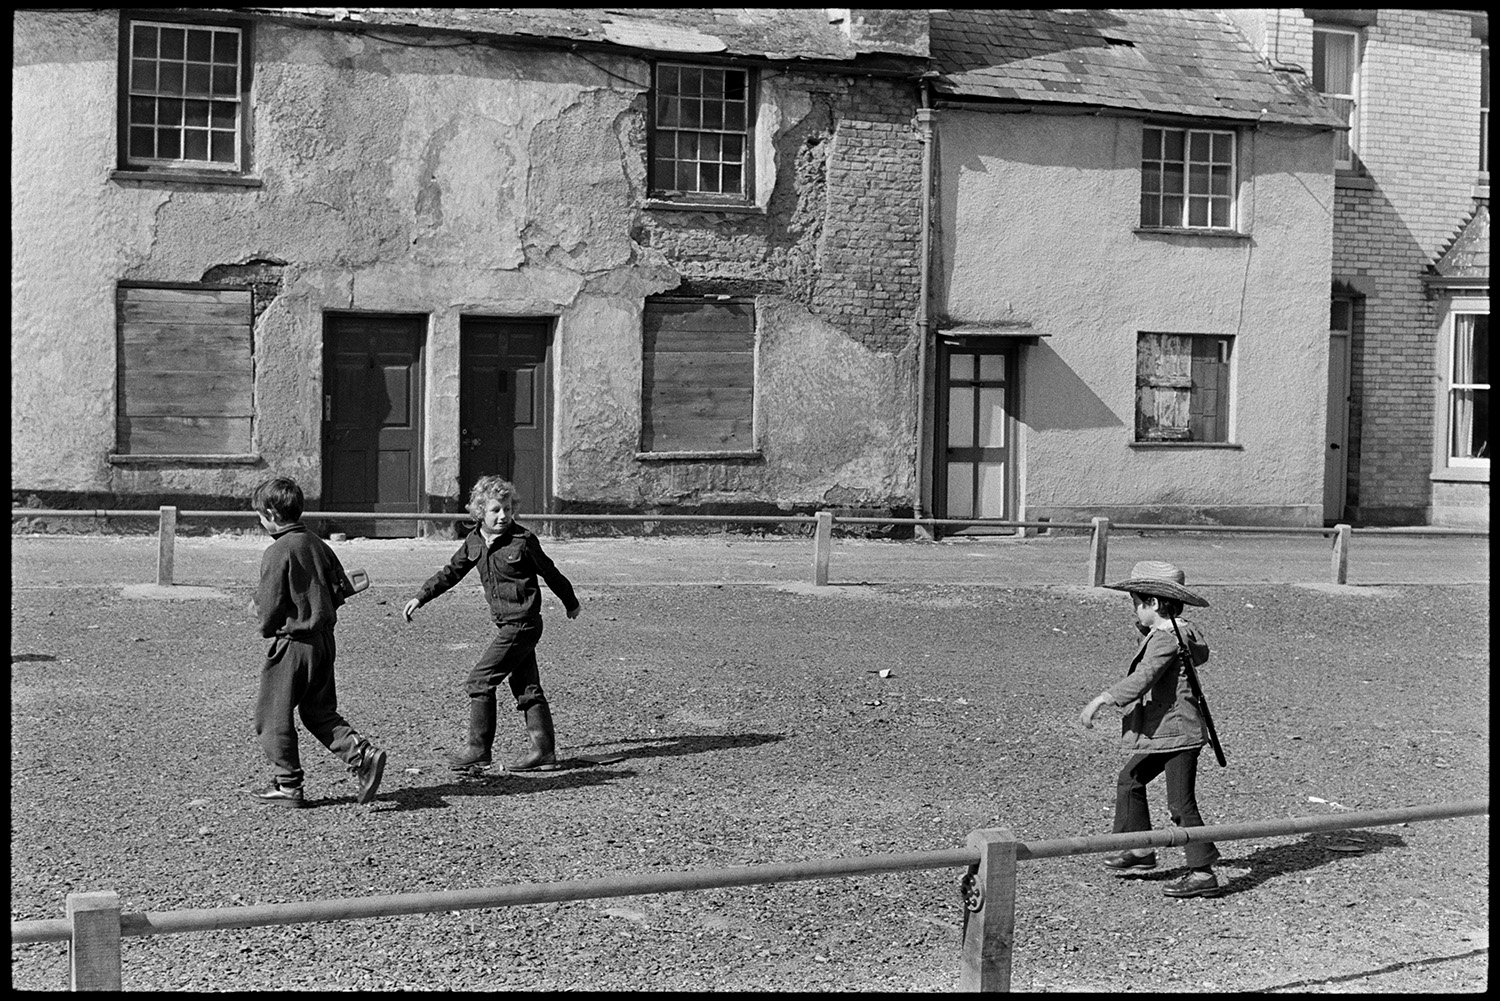 Street scenes. Children and old houses before development.
[Three children, one wearing a hat and carrying a toy gun, playing in the street at Tuly Street, Barnstaple. Houses with boarded up windows are visible on the other side of the street.]